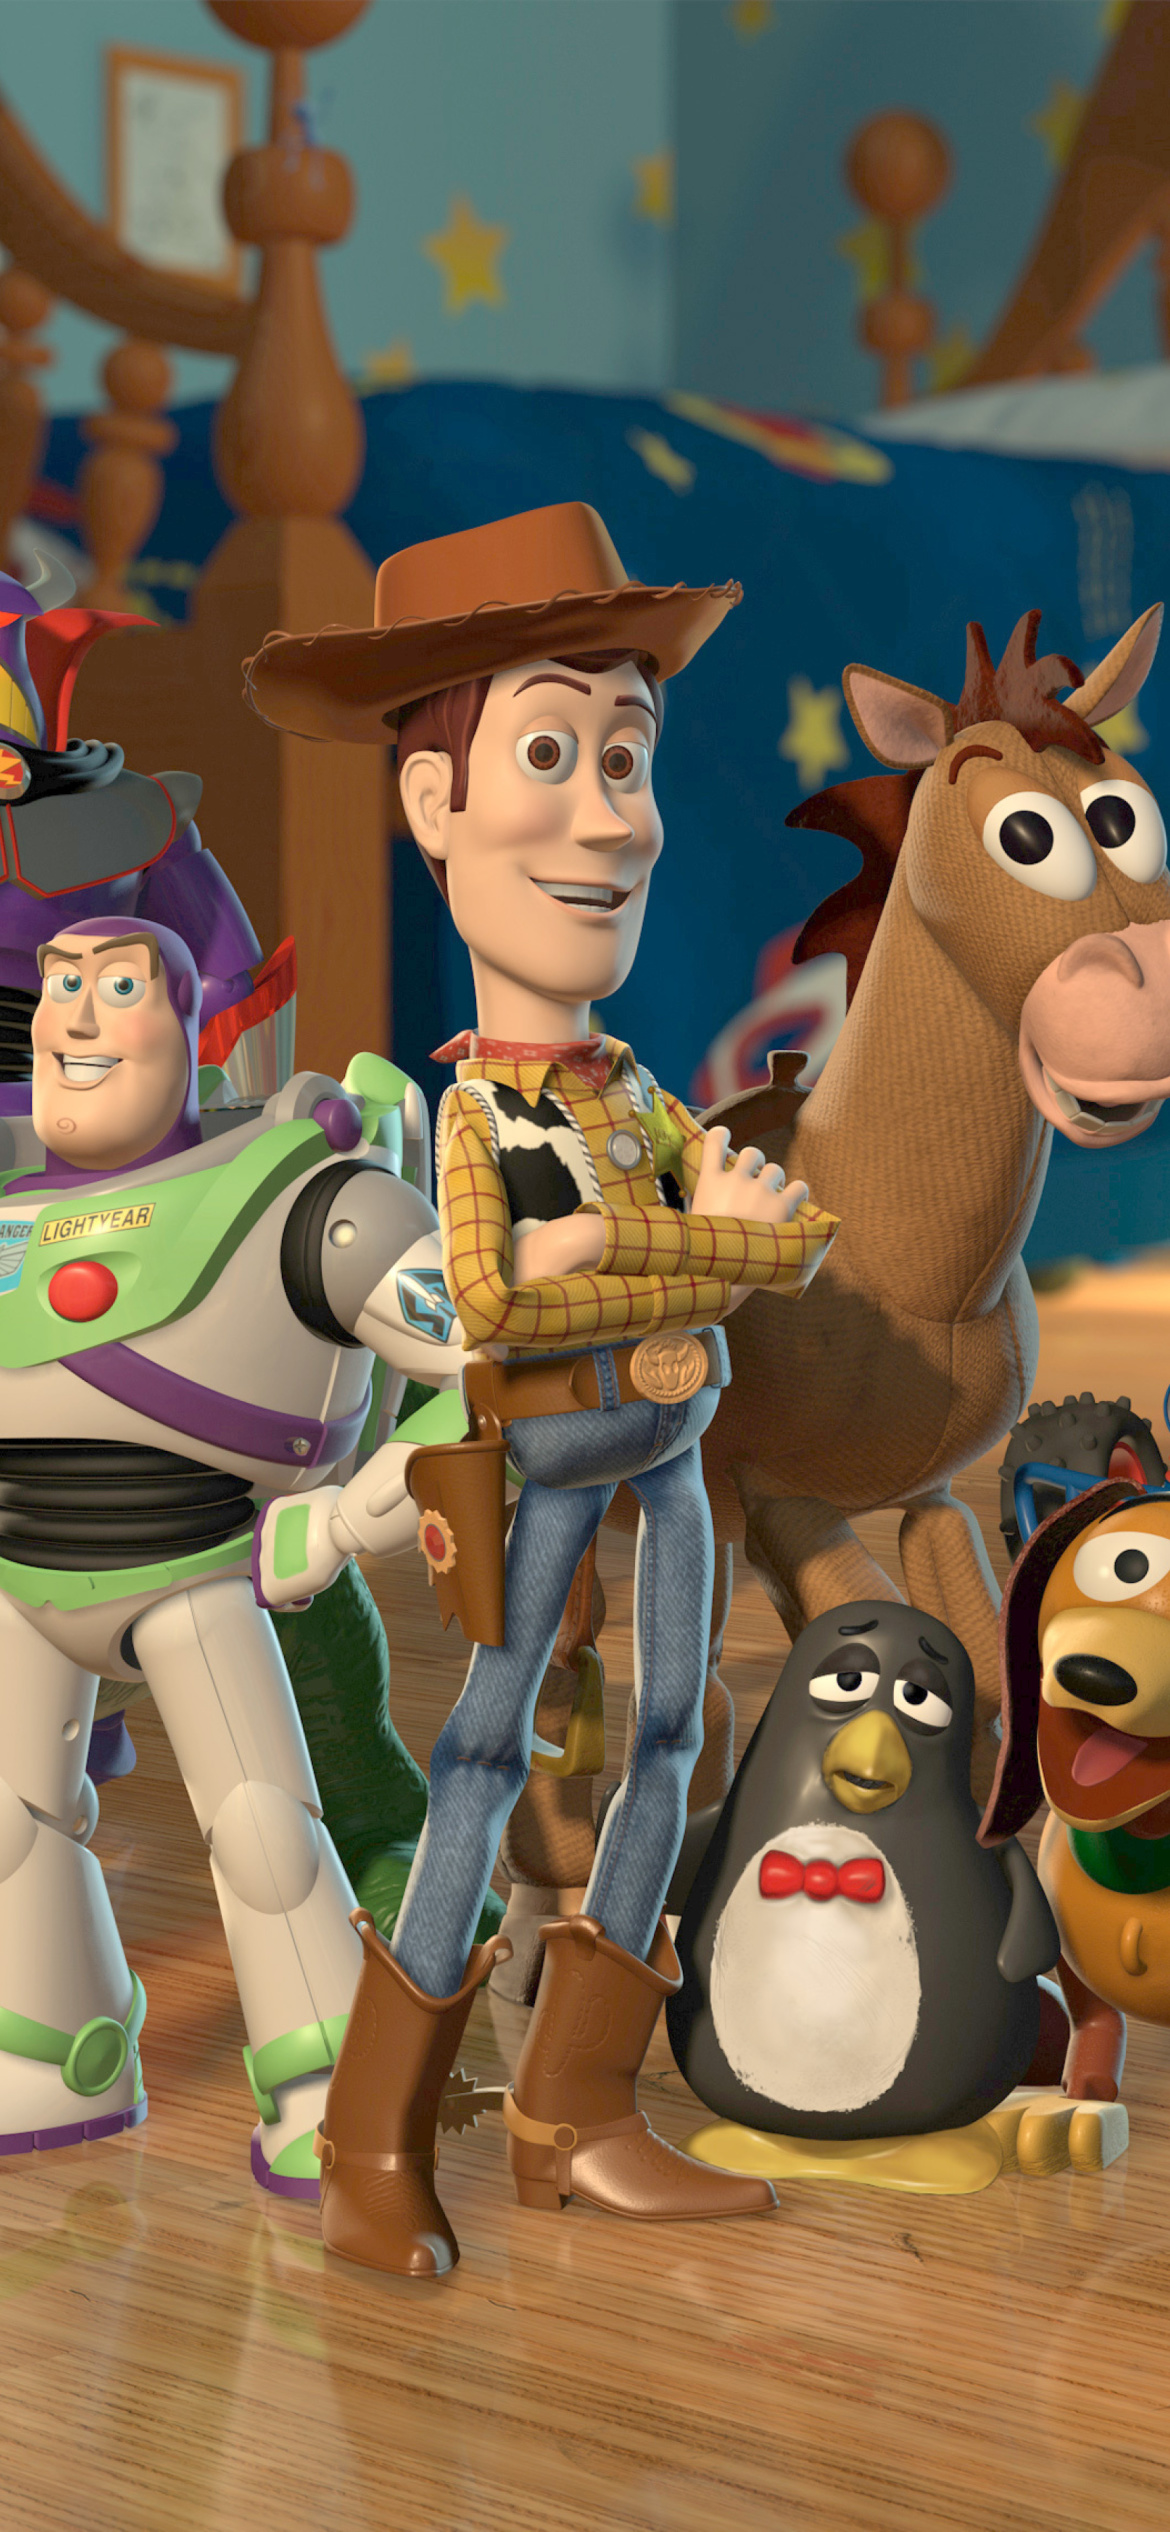 Toy Story wallpaper 1170x2532